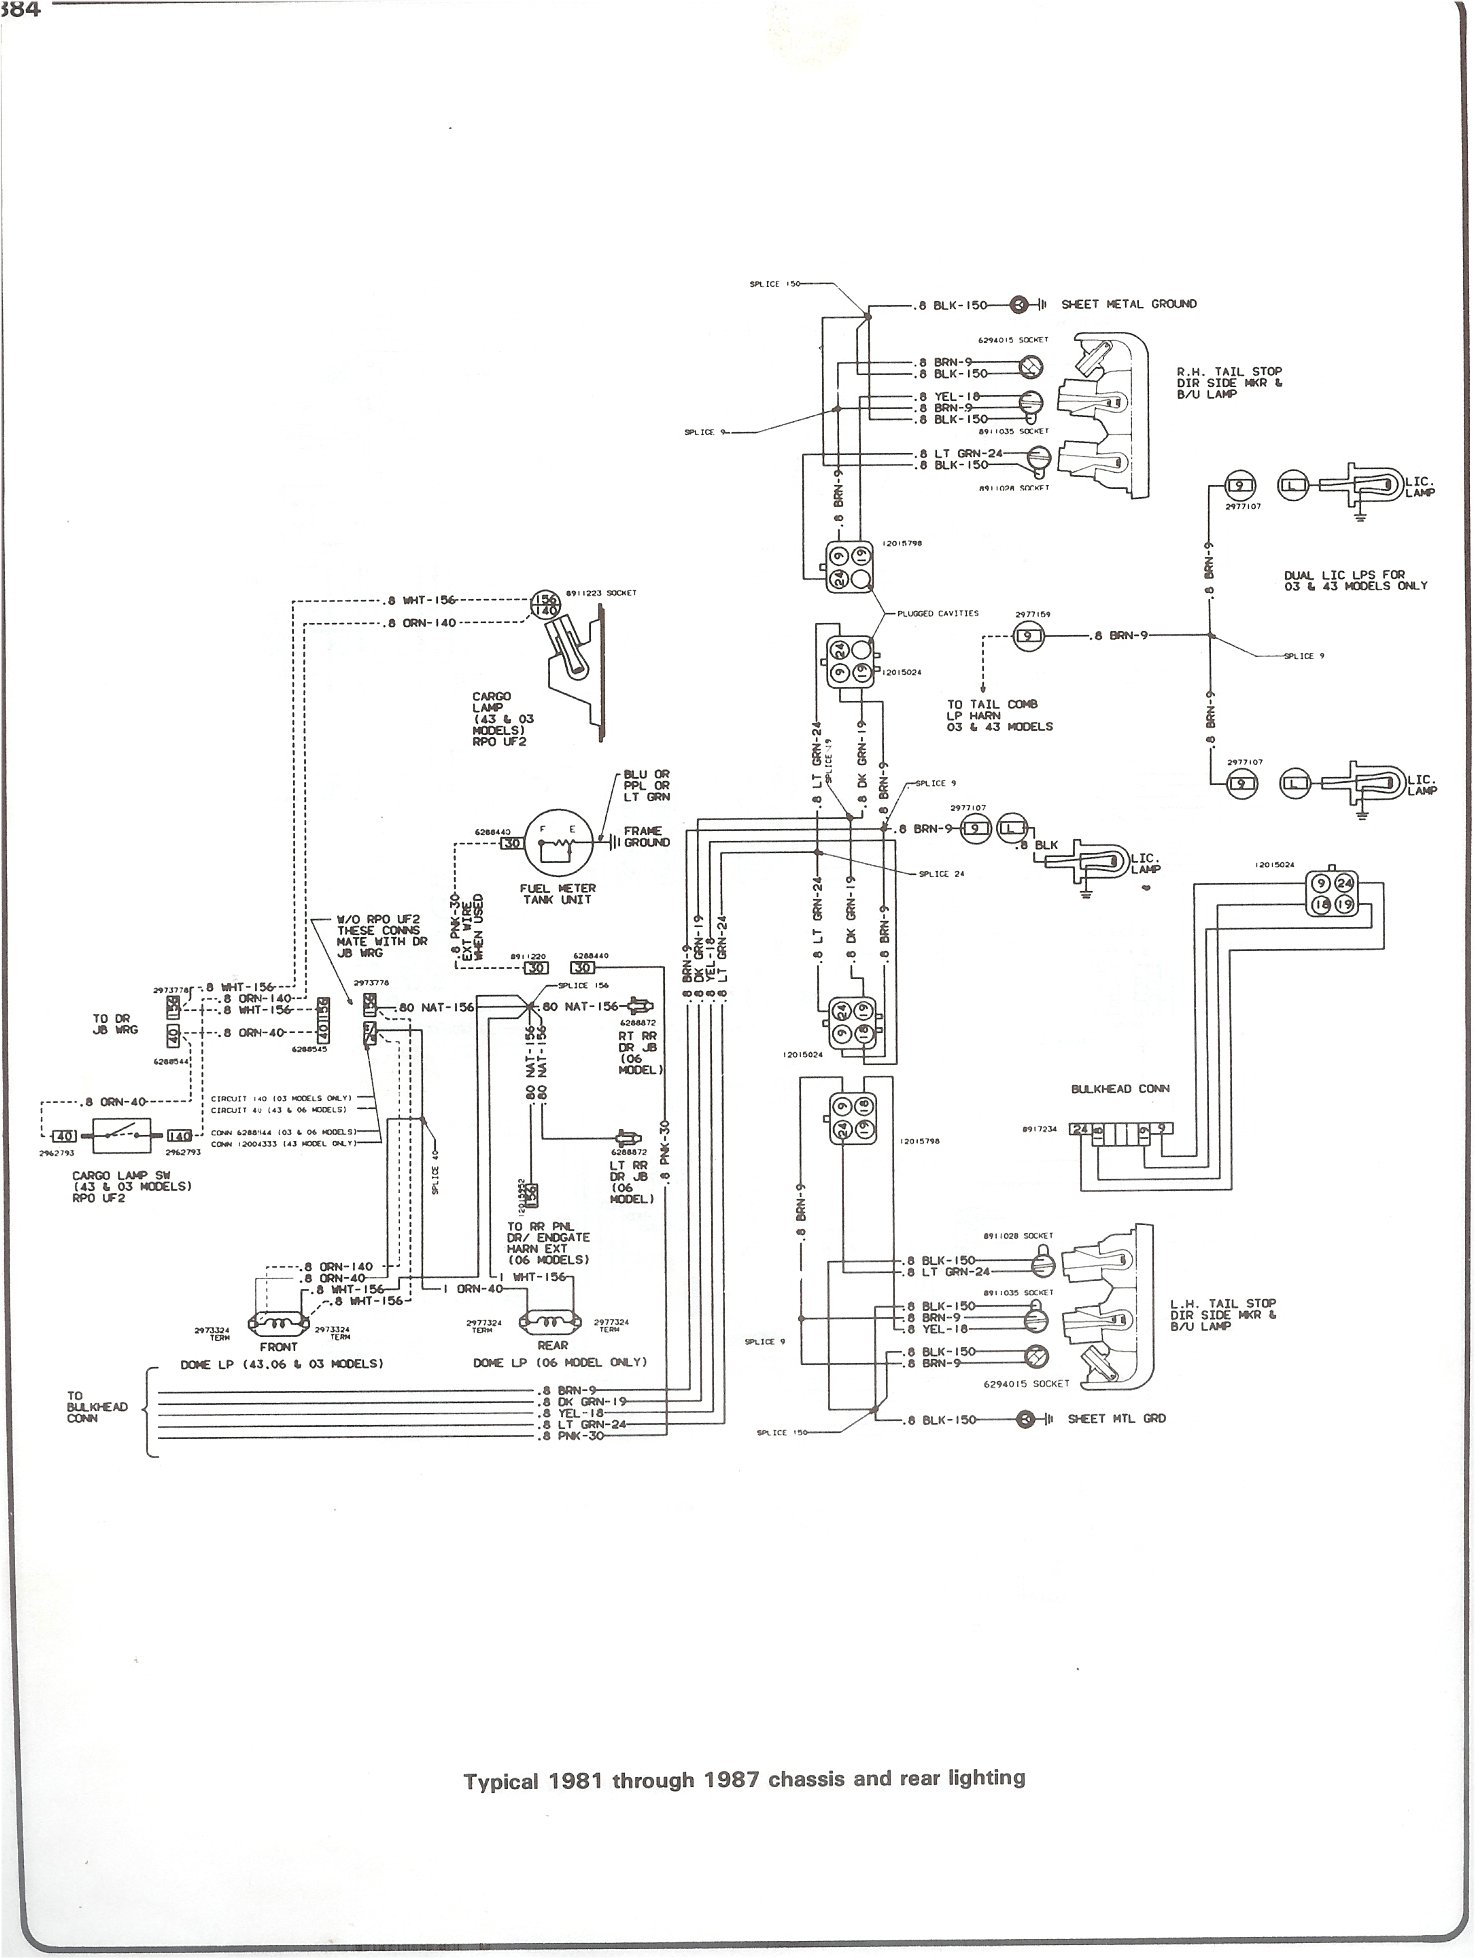 73-87 chevy truck wiring diagram manual